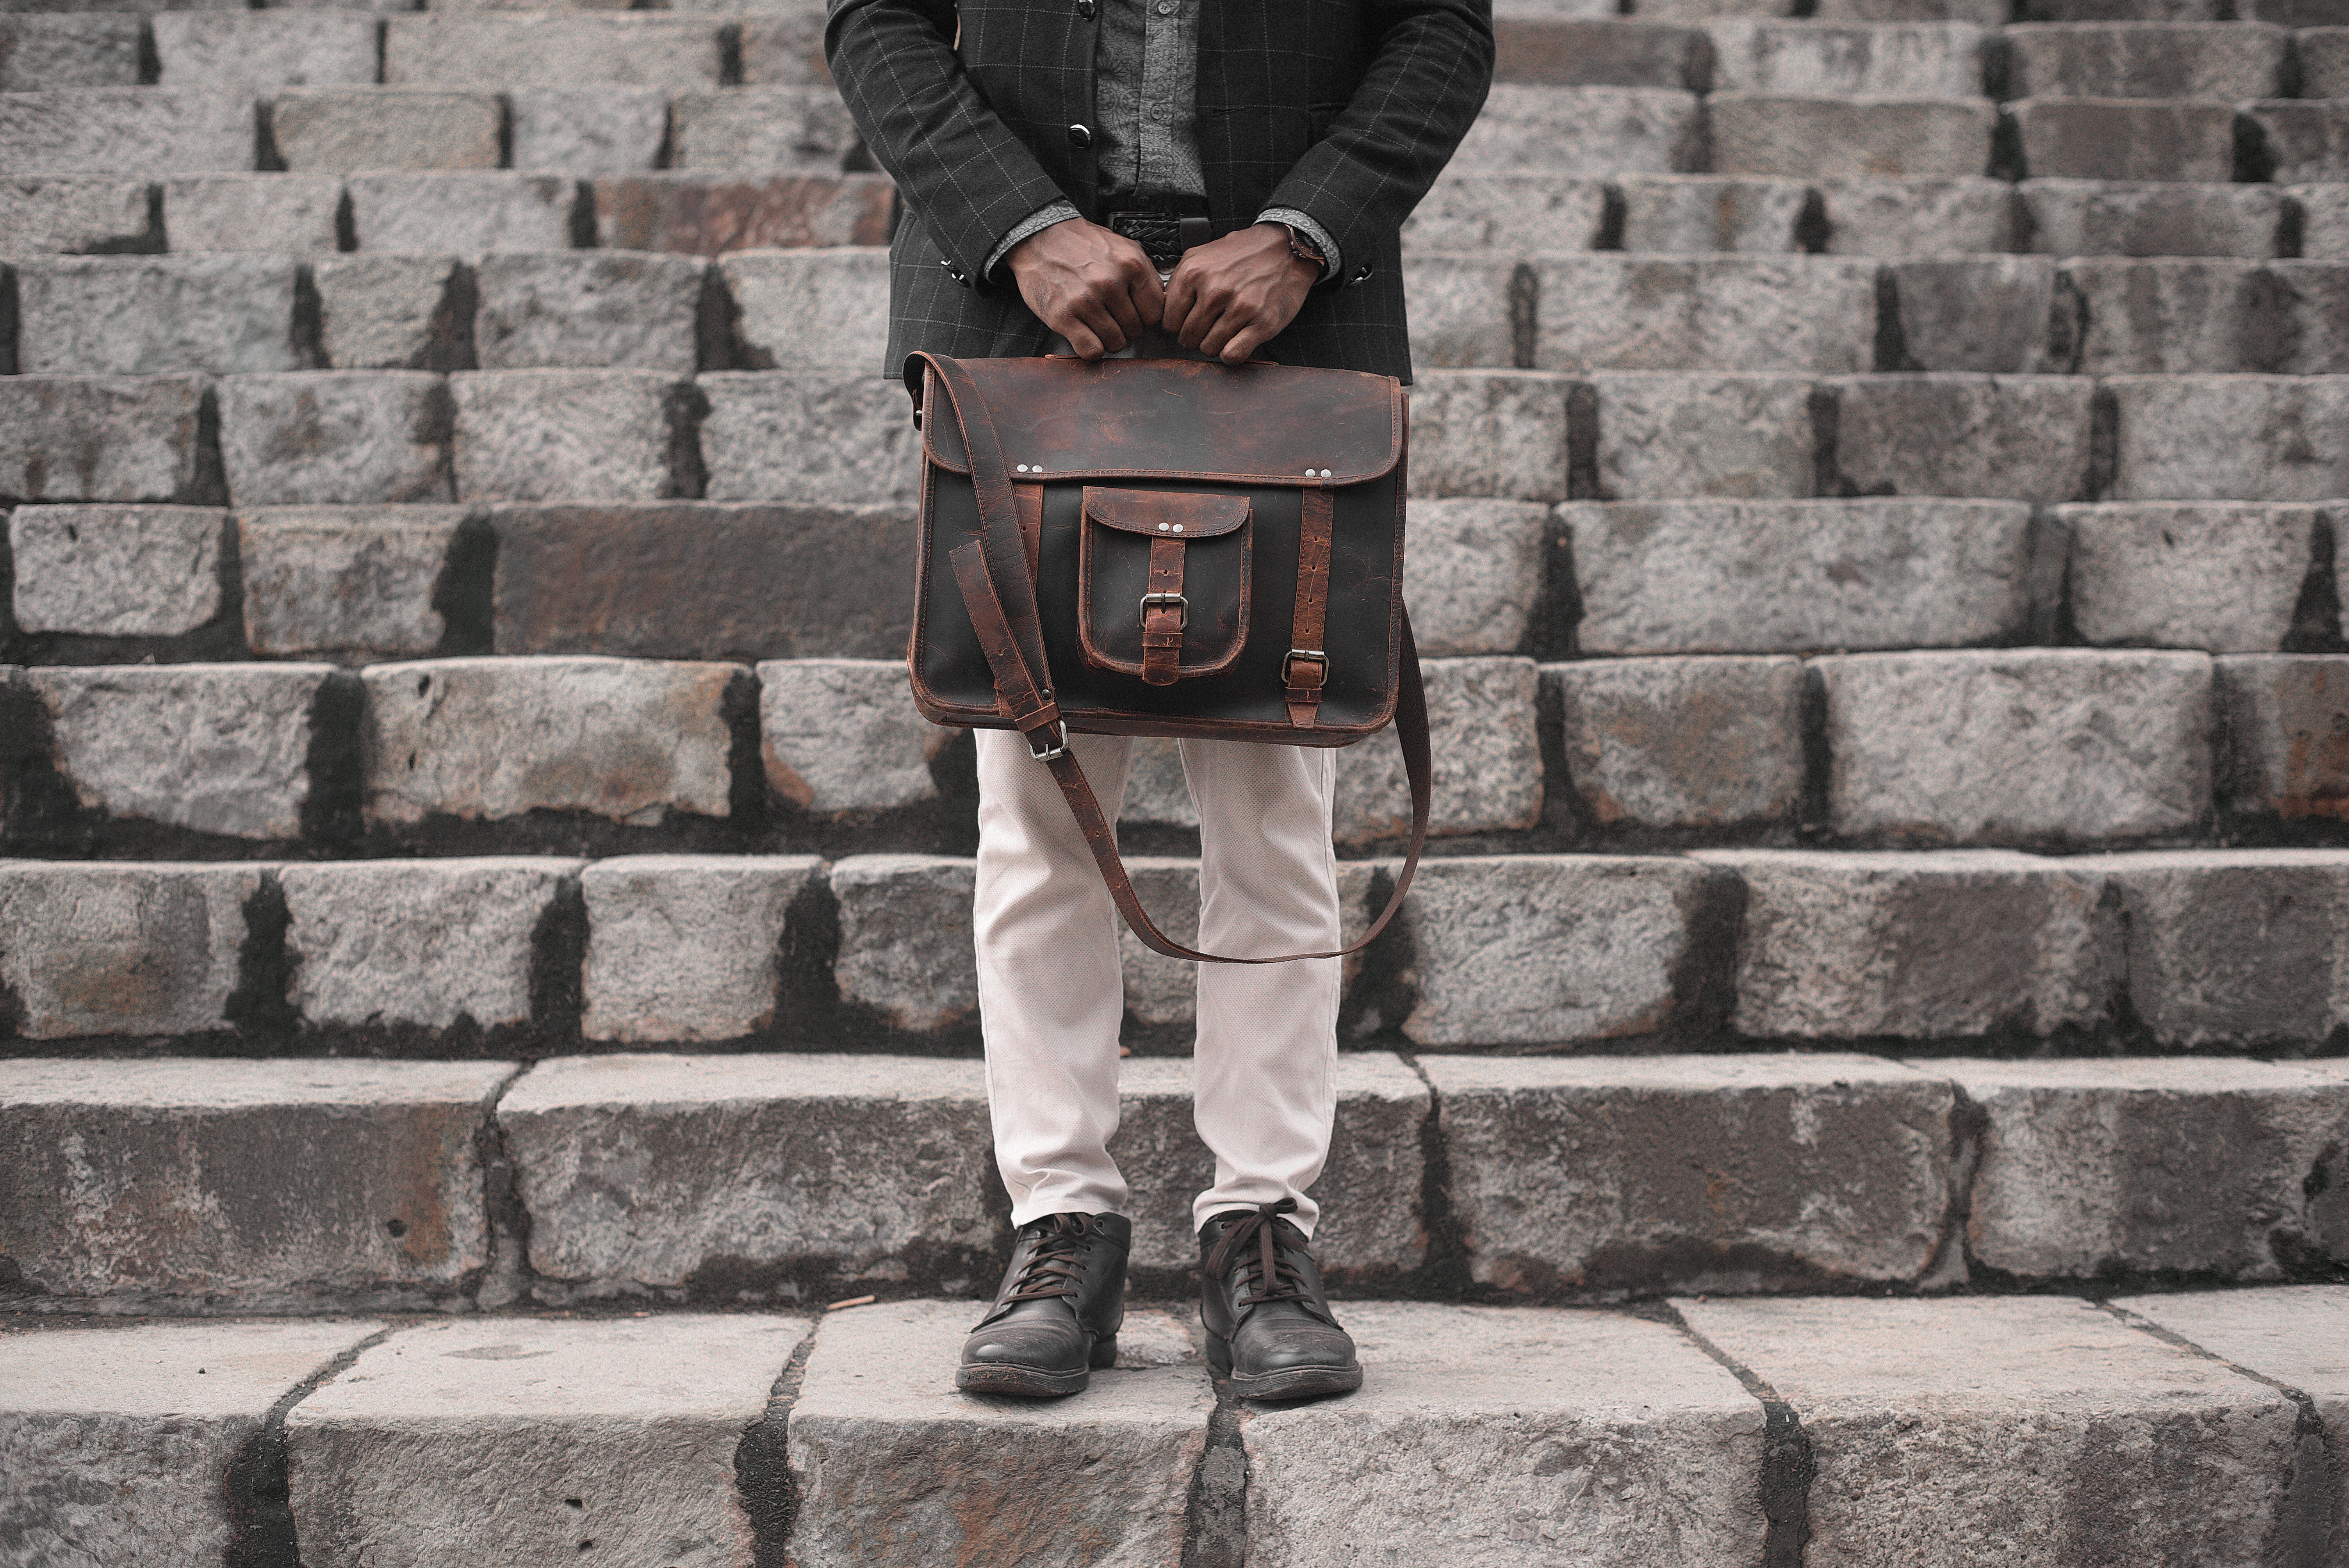 Man Holding A Leather Bag On A Set Of Stairs